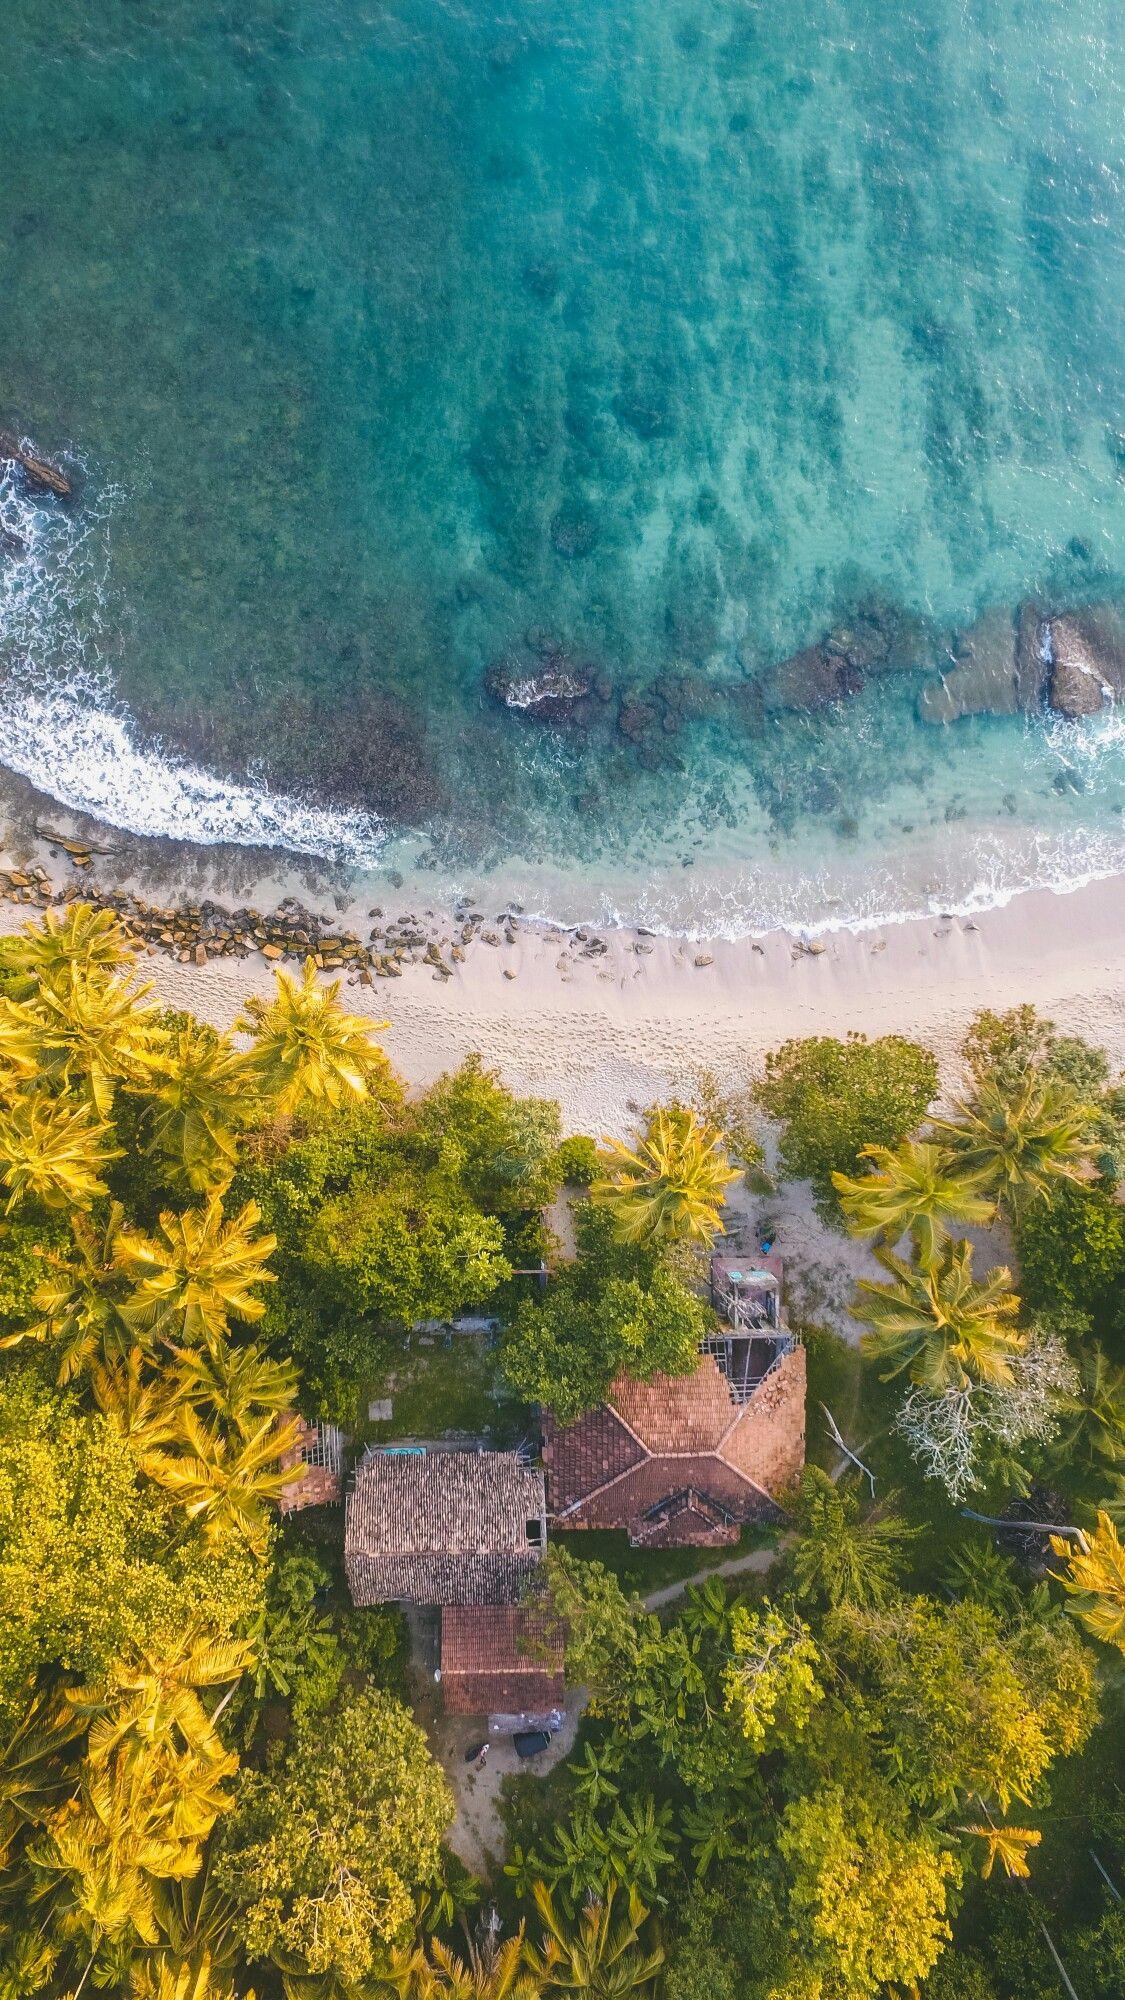 Drone view from above, the ocean, palm trees in 2019